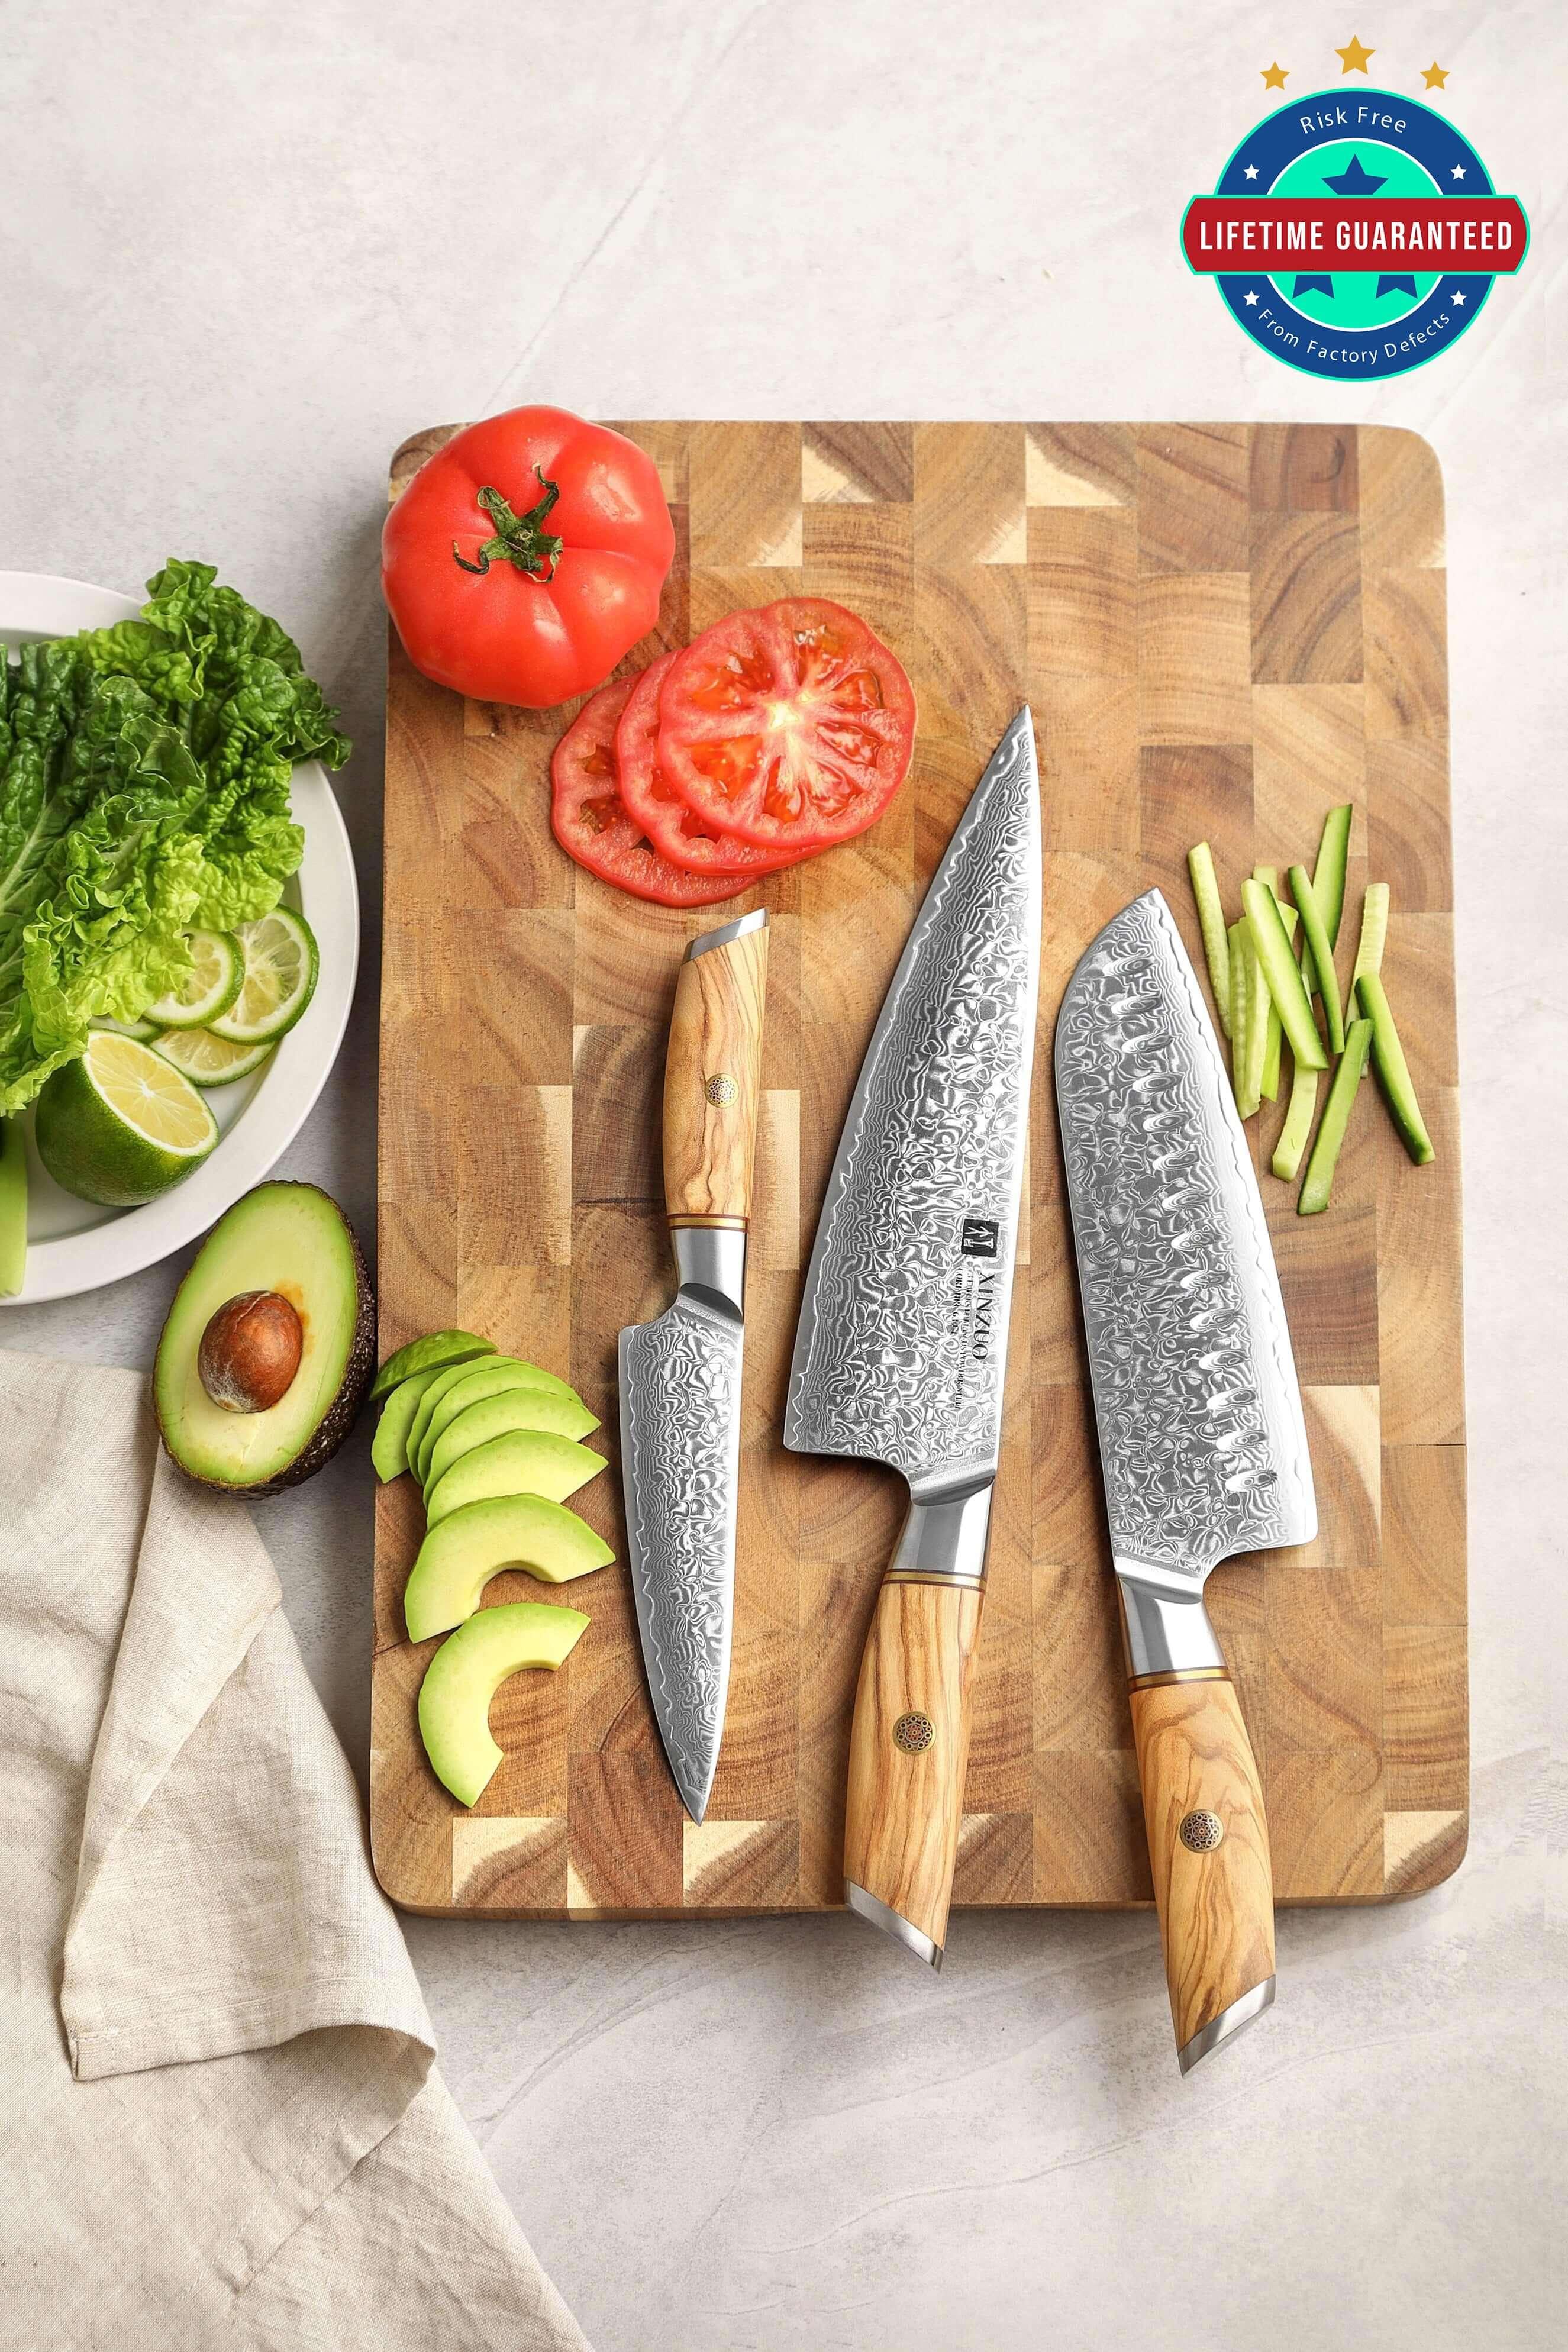 XINZUO 8.5'' Inch Chef Knife High Carbon 62-64 HRC Power Damascus Steel  Professional Kitchen Knives Meat Tools with Olive Handle